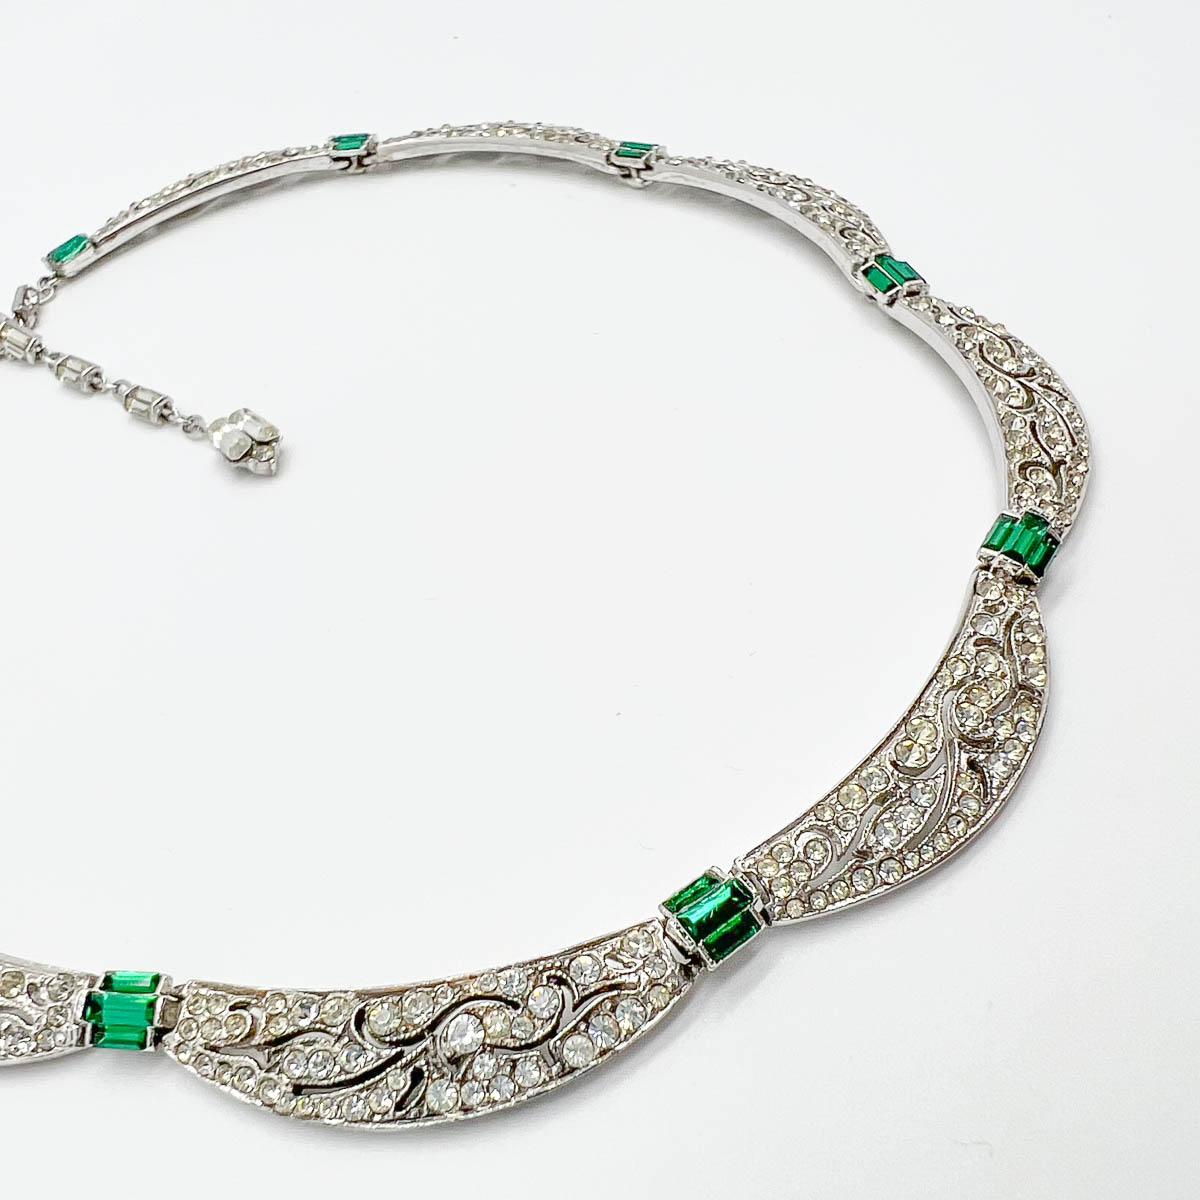 A Vintage Deco Style Emerald Necklace. This beautiful creation embodies the Art Deco period bringing emerald and white crystal together in an eternally stylish design featuring scalloped, pattern cut panels. Finished with a crystal embellished hang